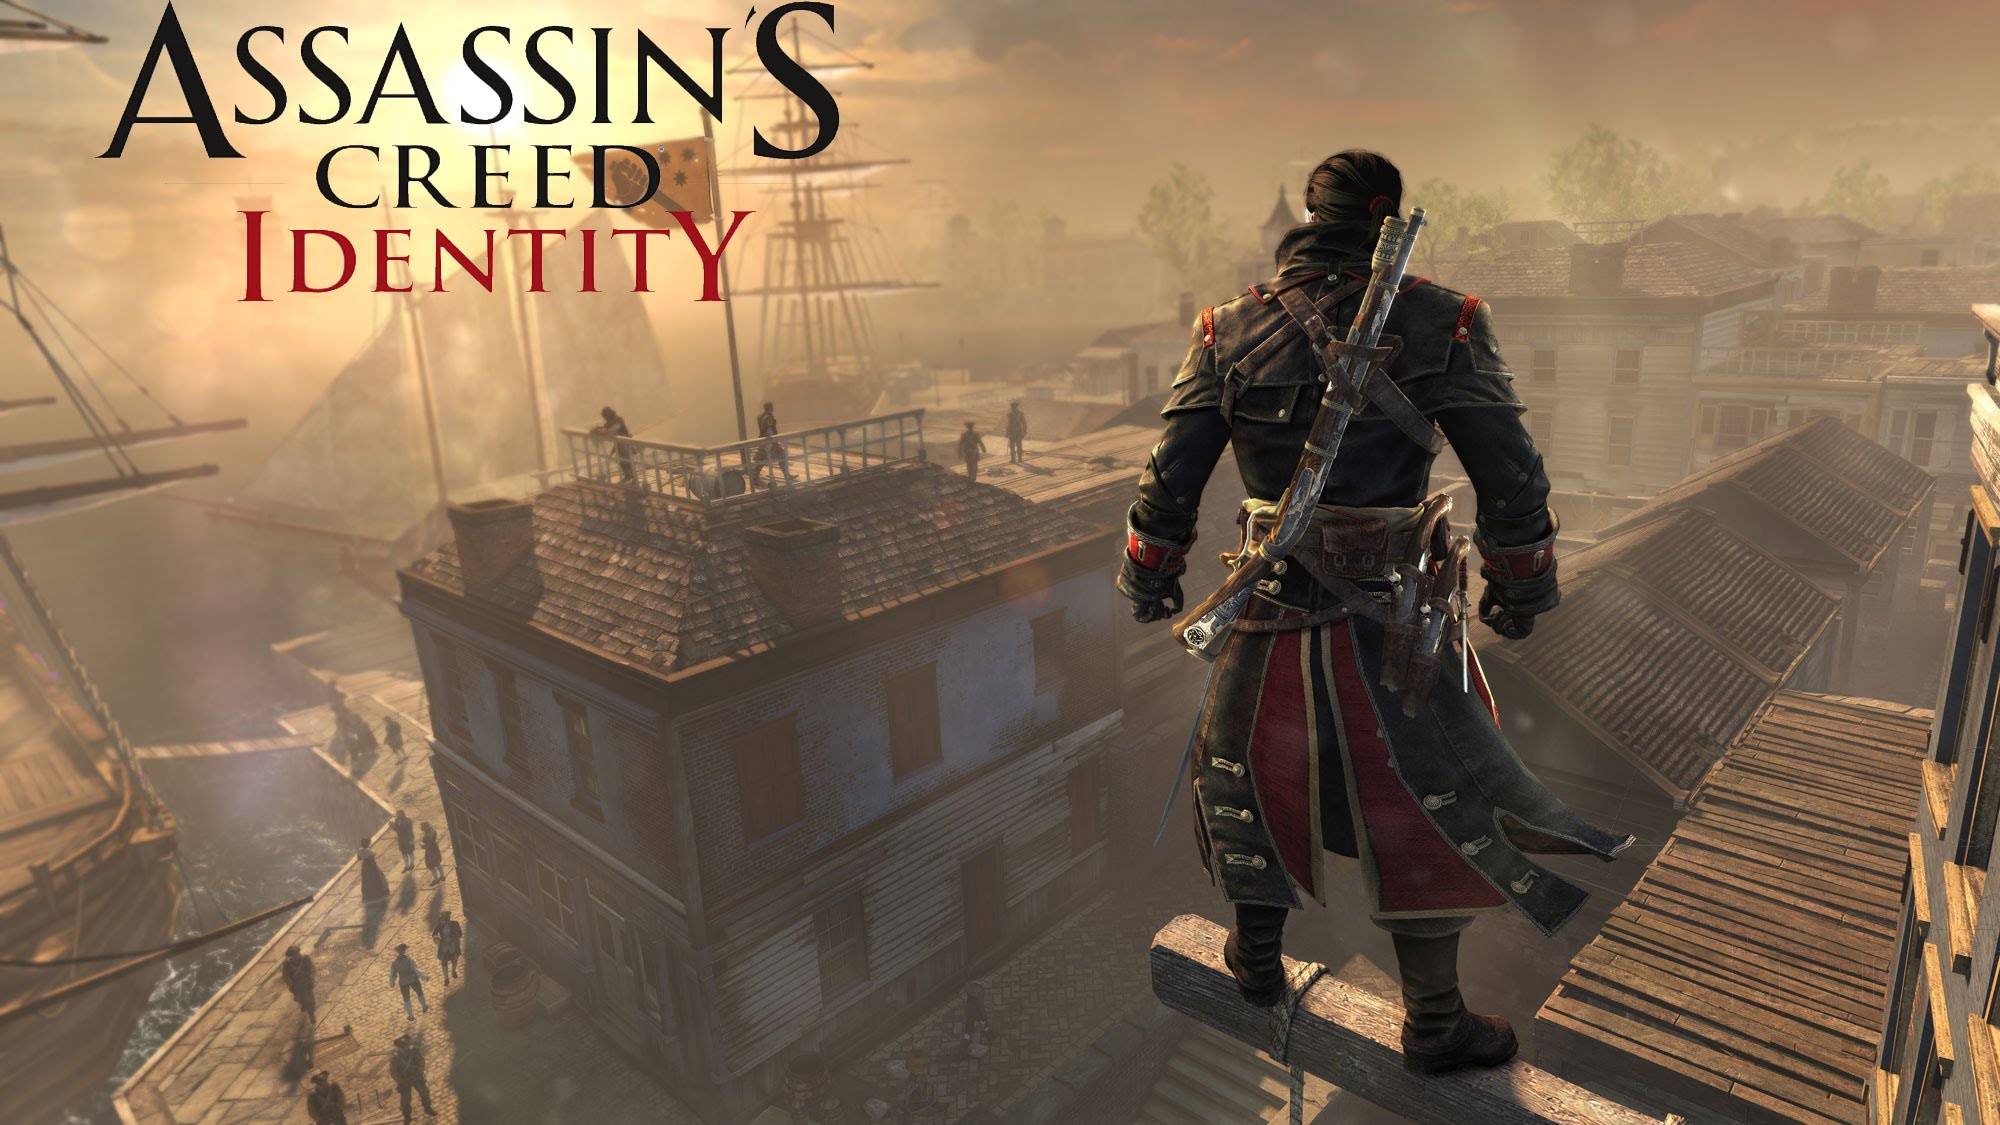 Assassin's Creed Identity Backgrounds on Wallpapers Vista